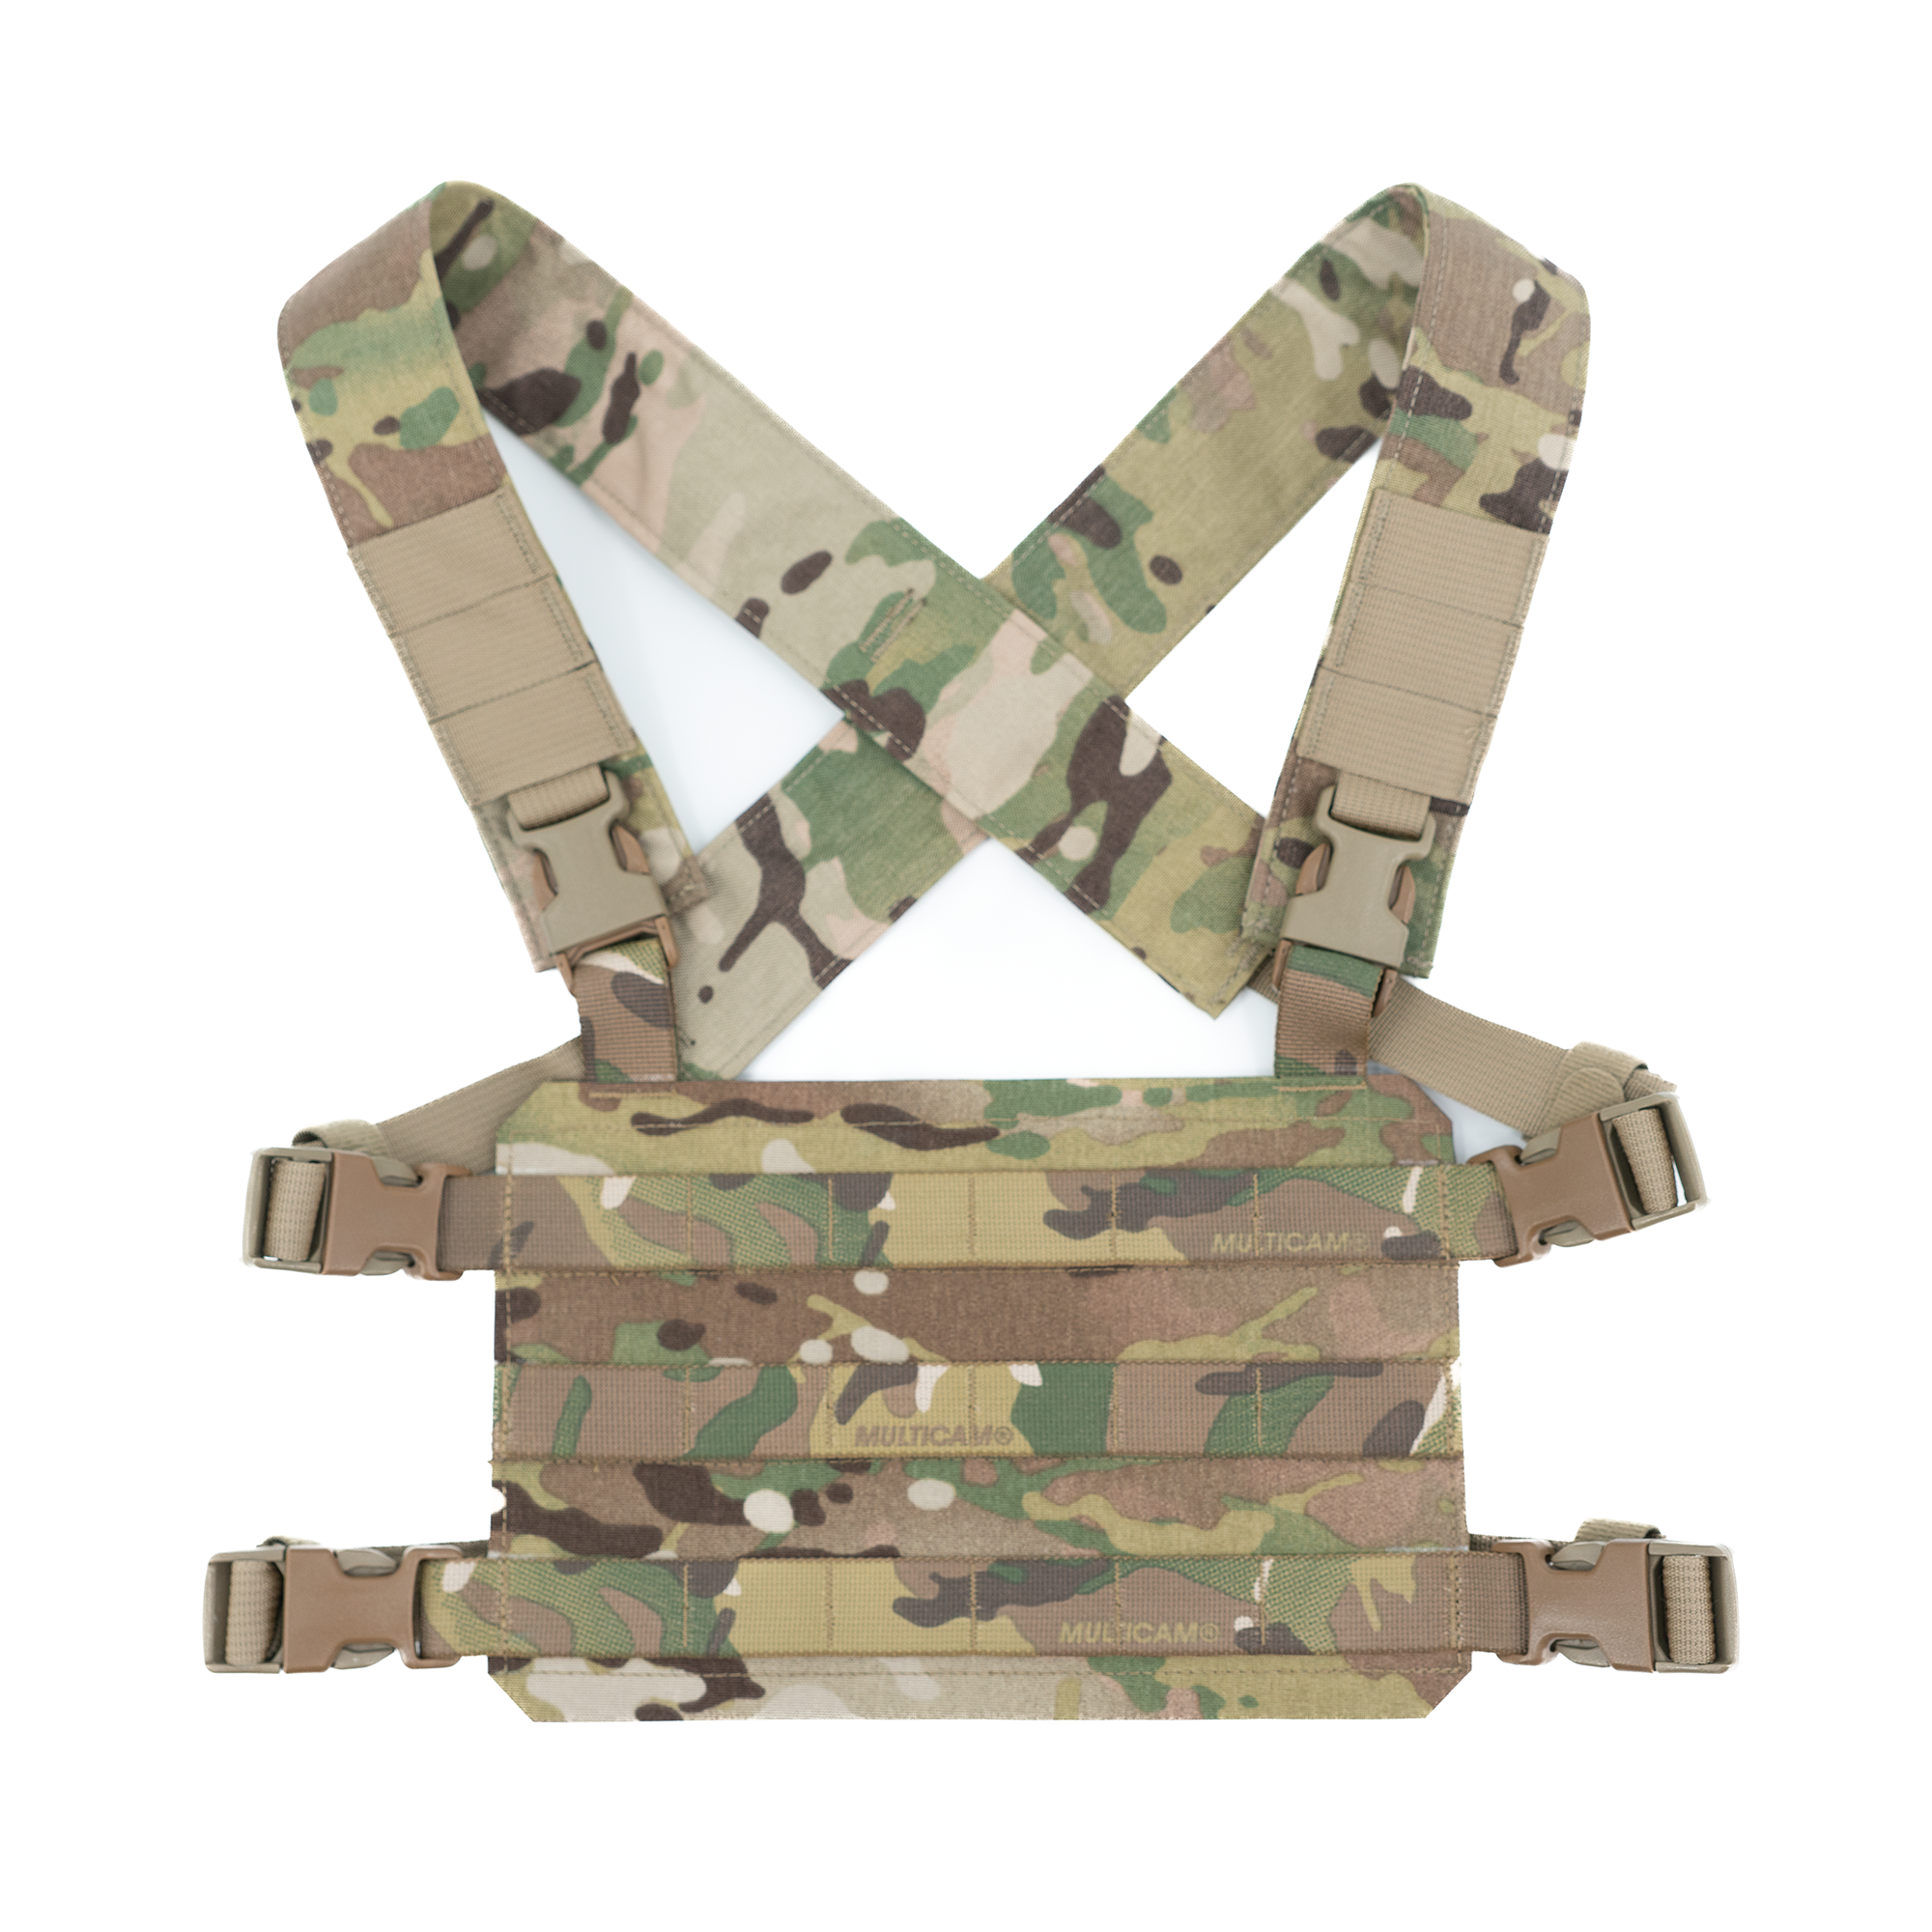 Search results for: 'Chest rig'